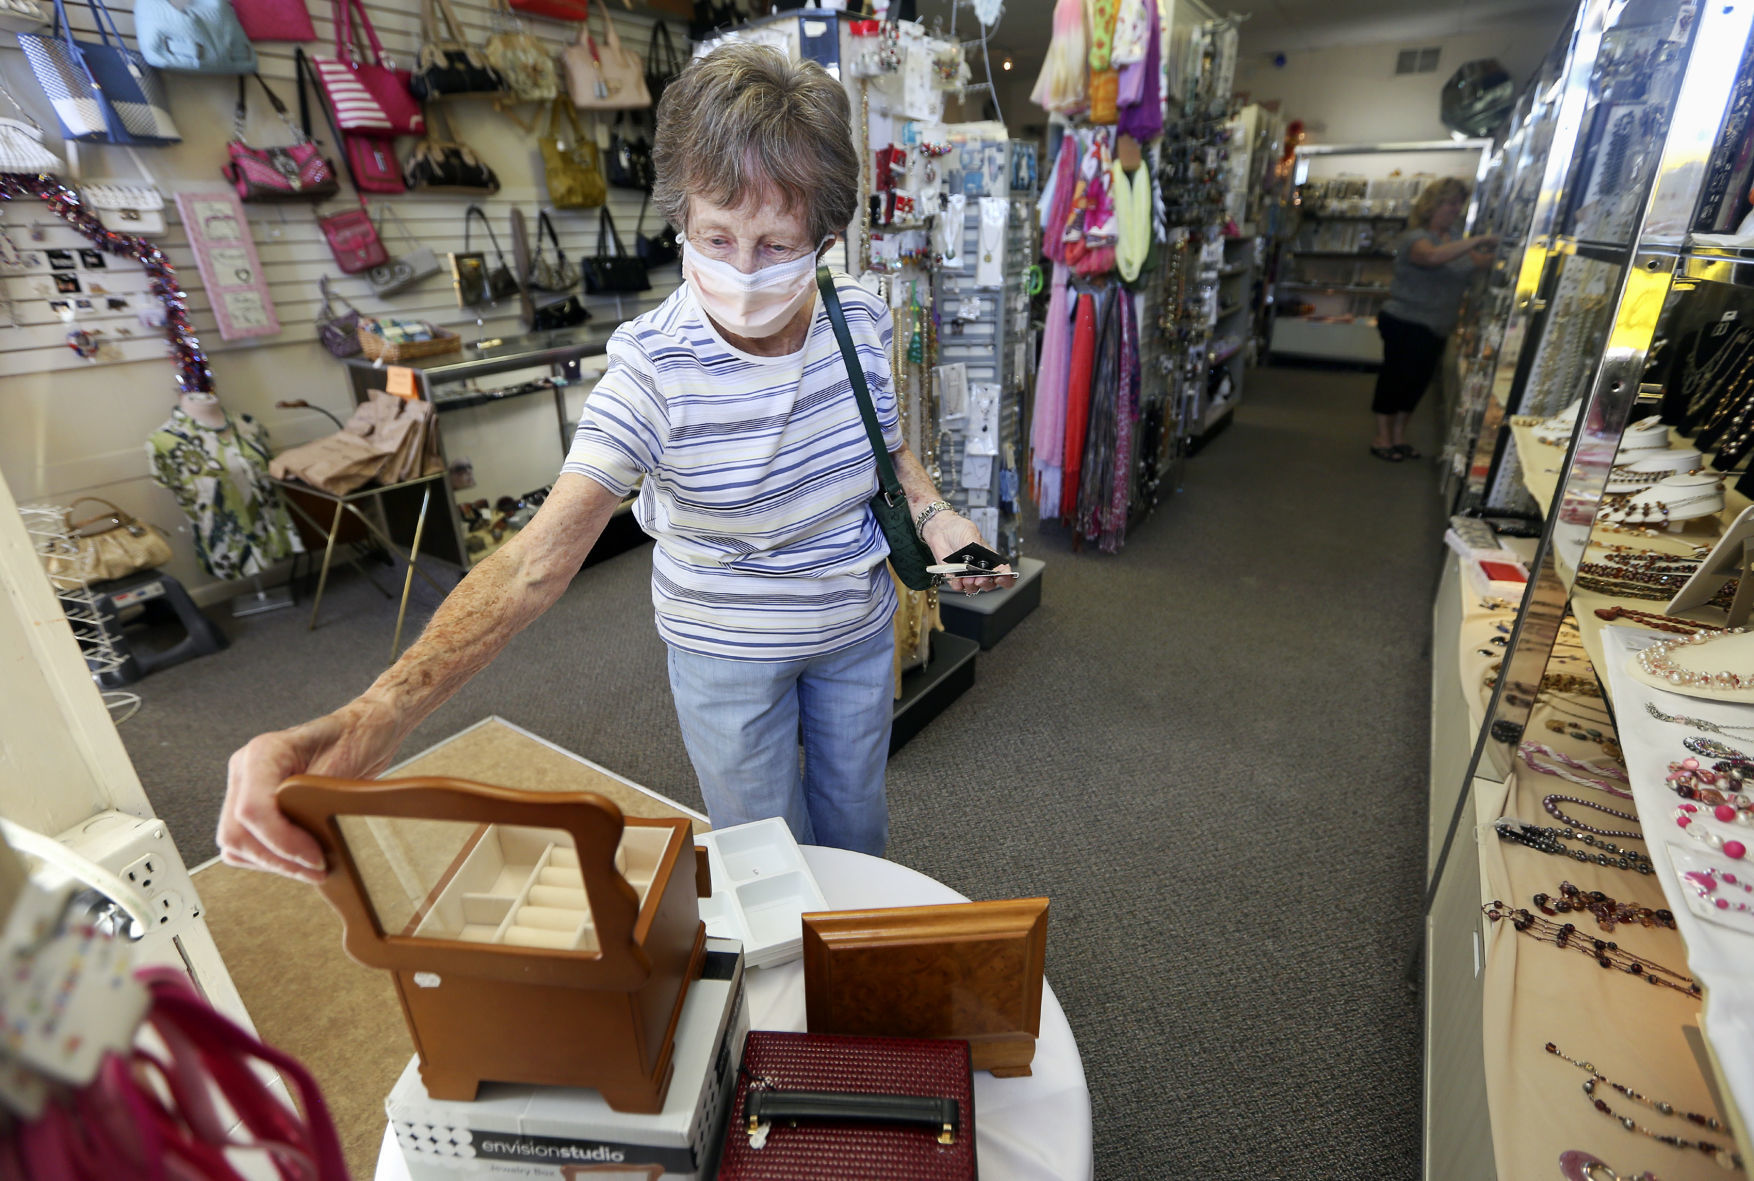 Pat Manders, of Dubuque, browses jewelry boxes at The Jewelry Box in Dubuque on Thursday. PHOTO CREDIT: NICKI KOHL